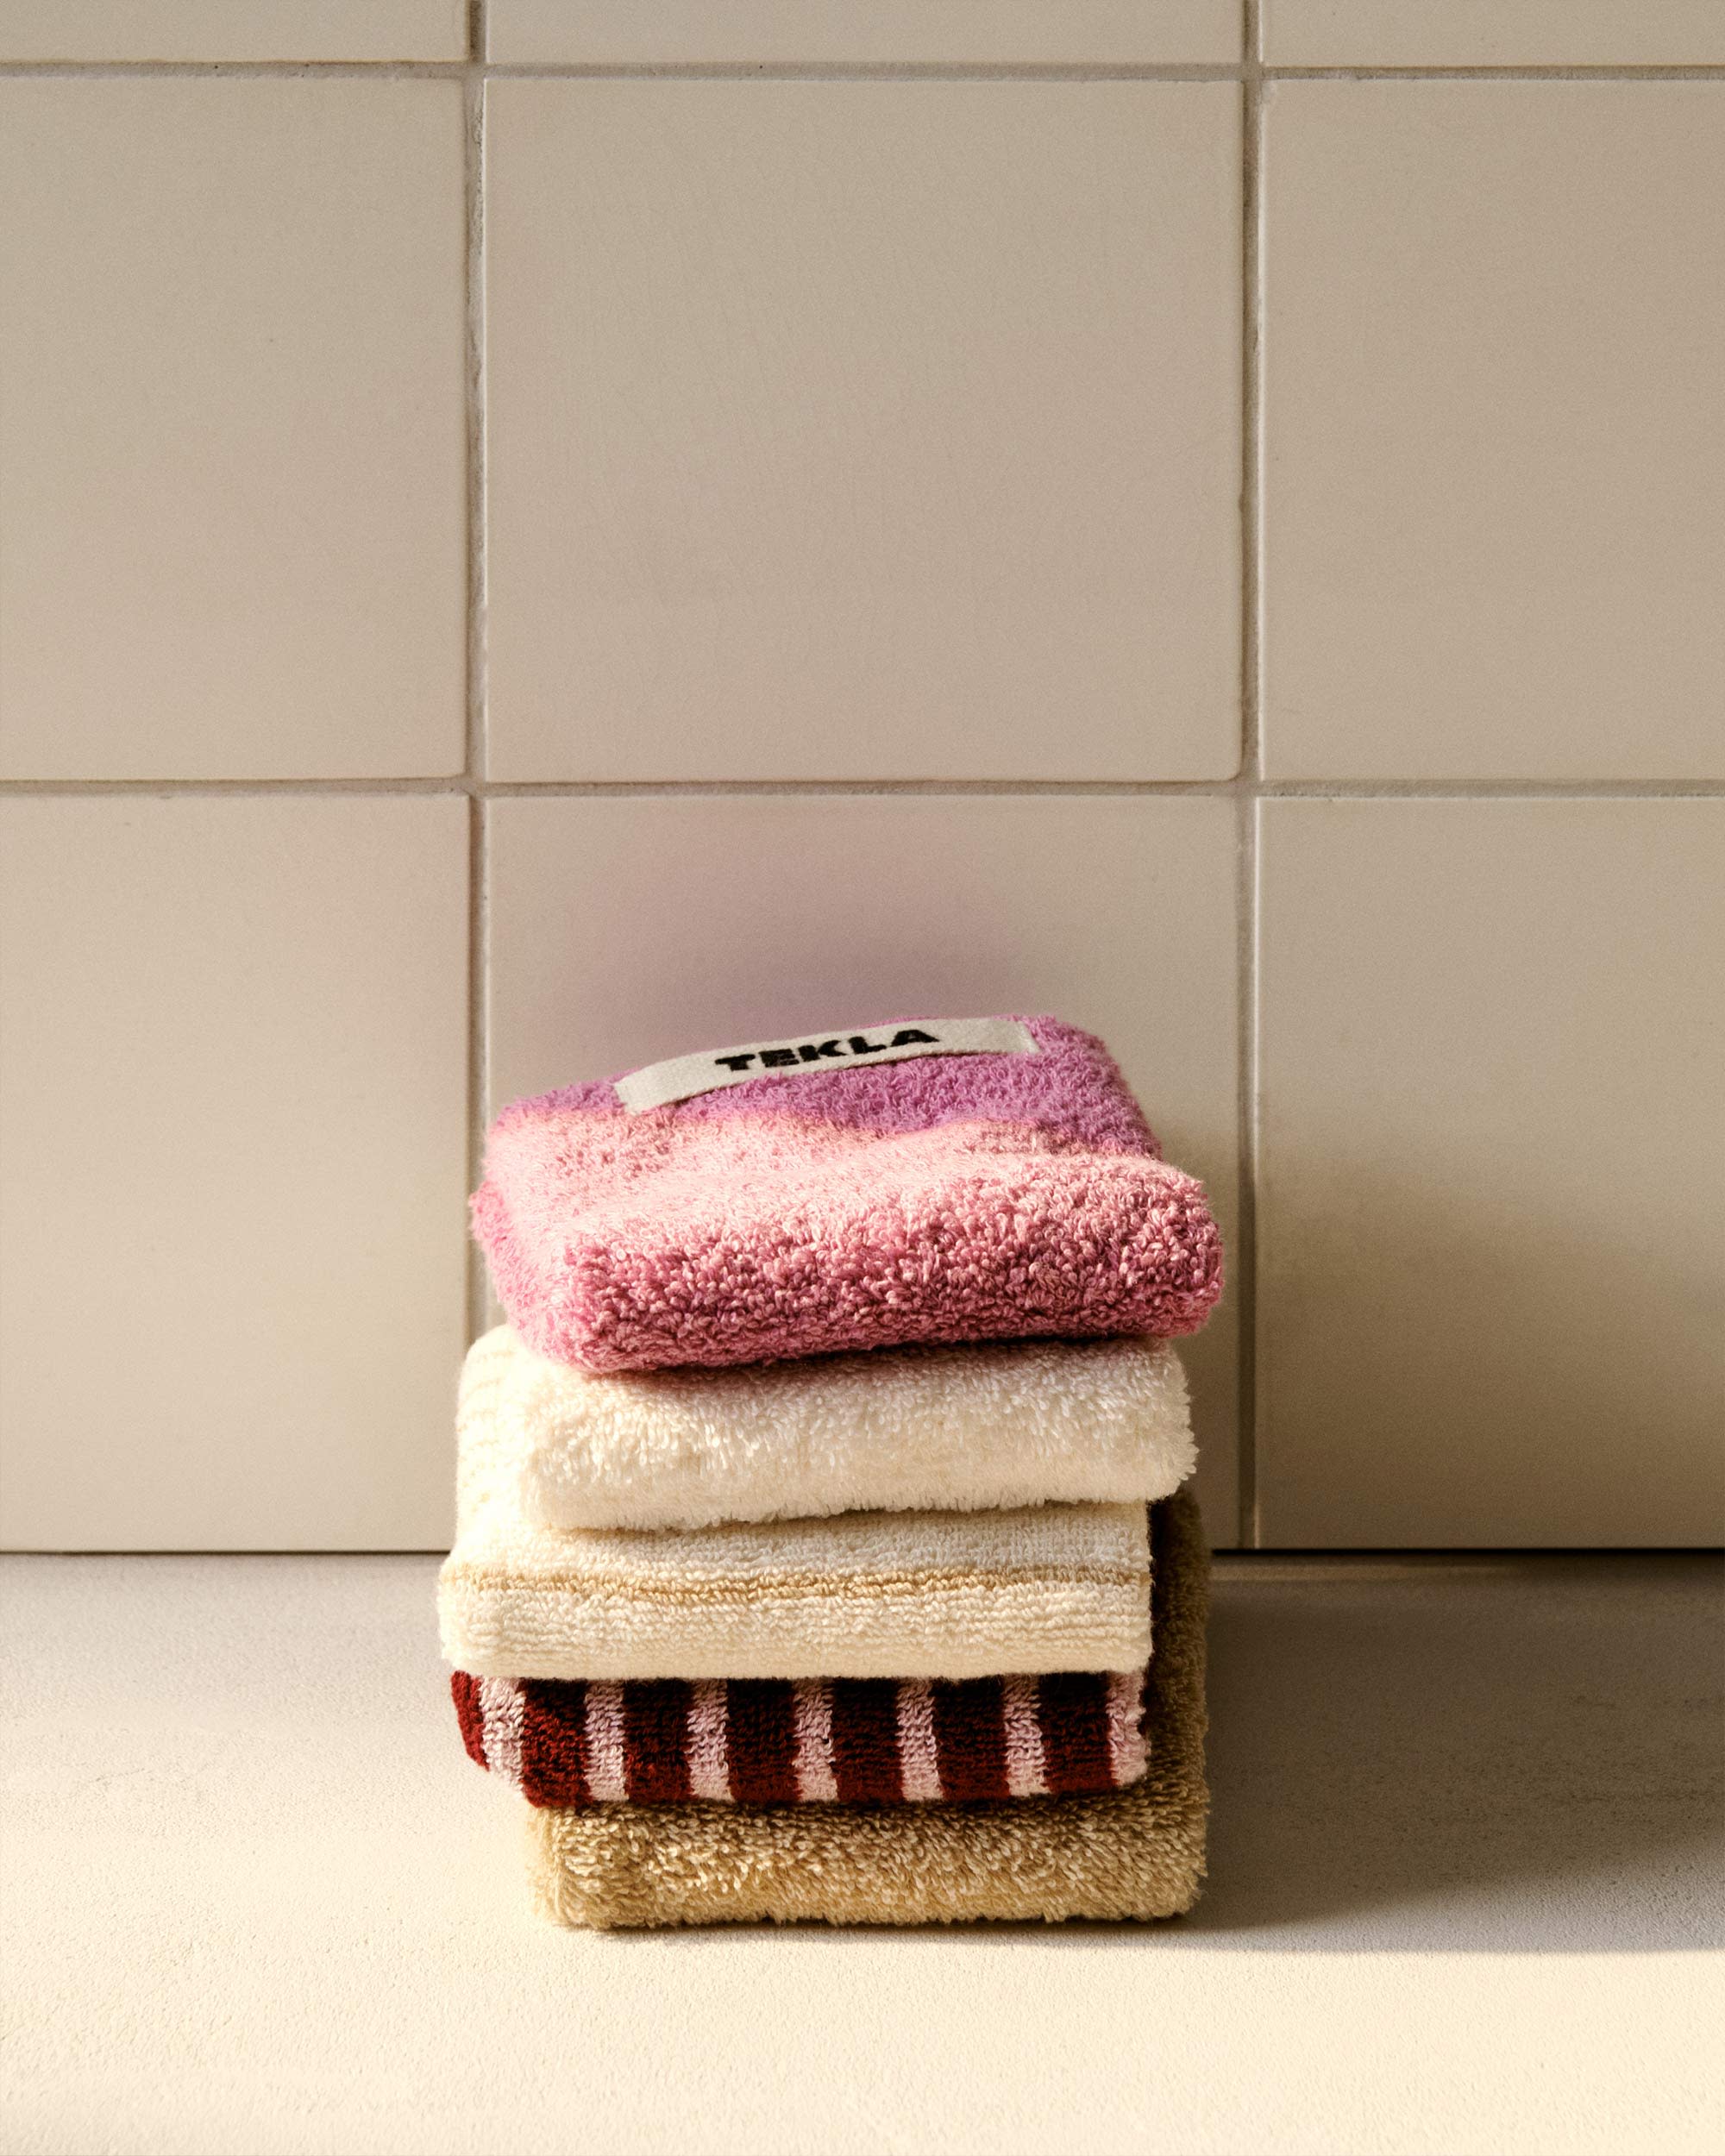 Stacked pink and white towels